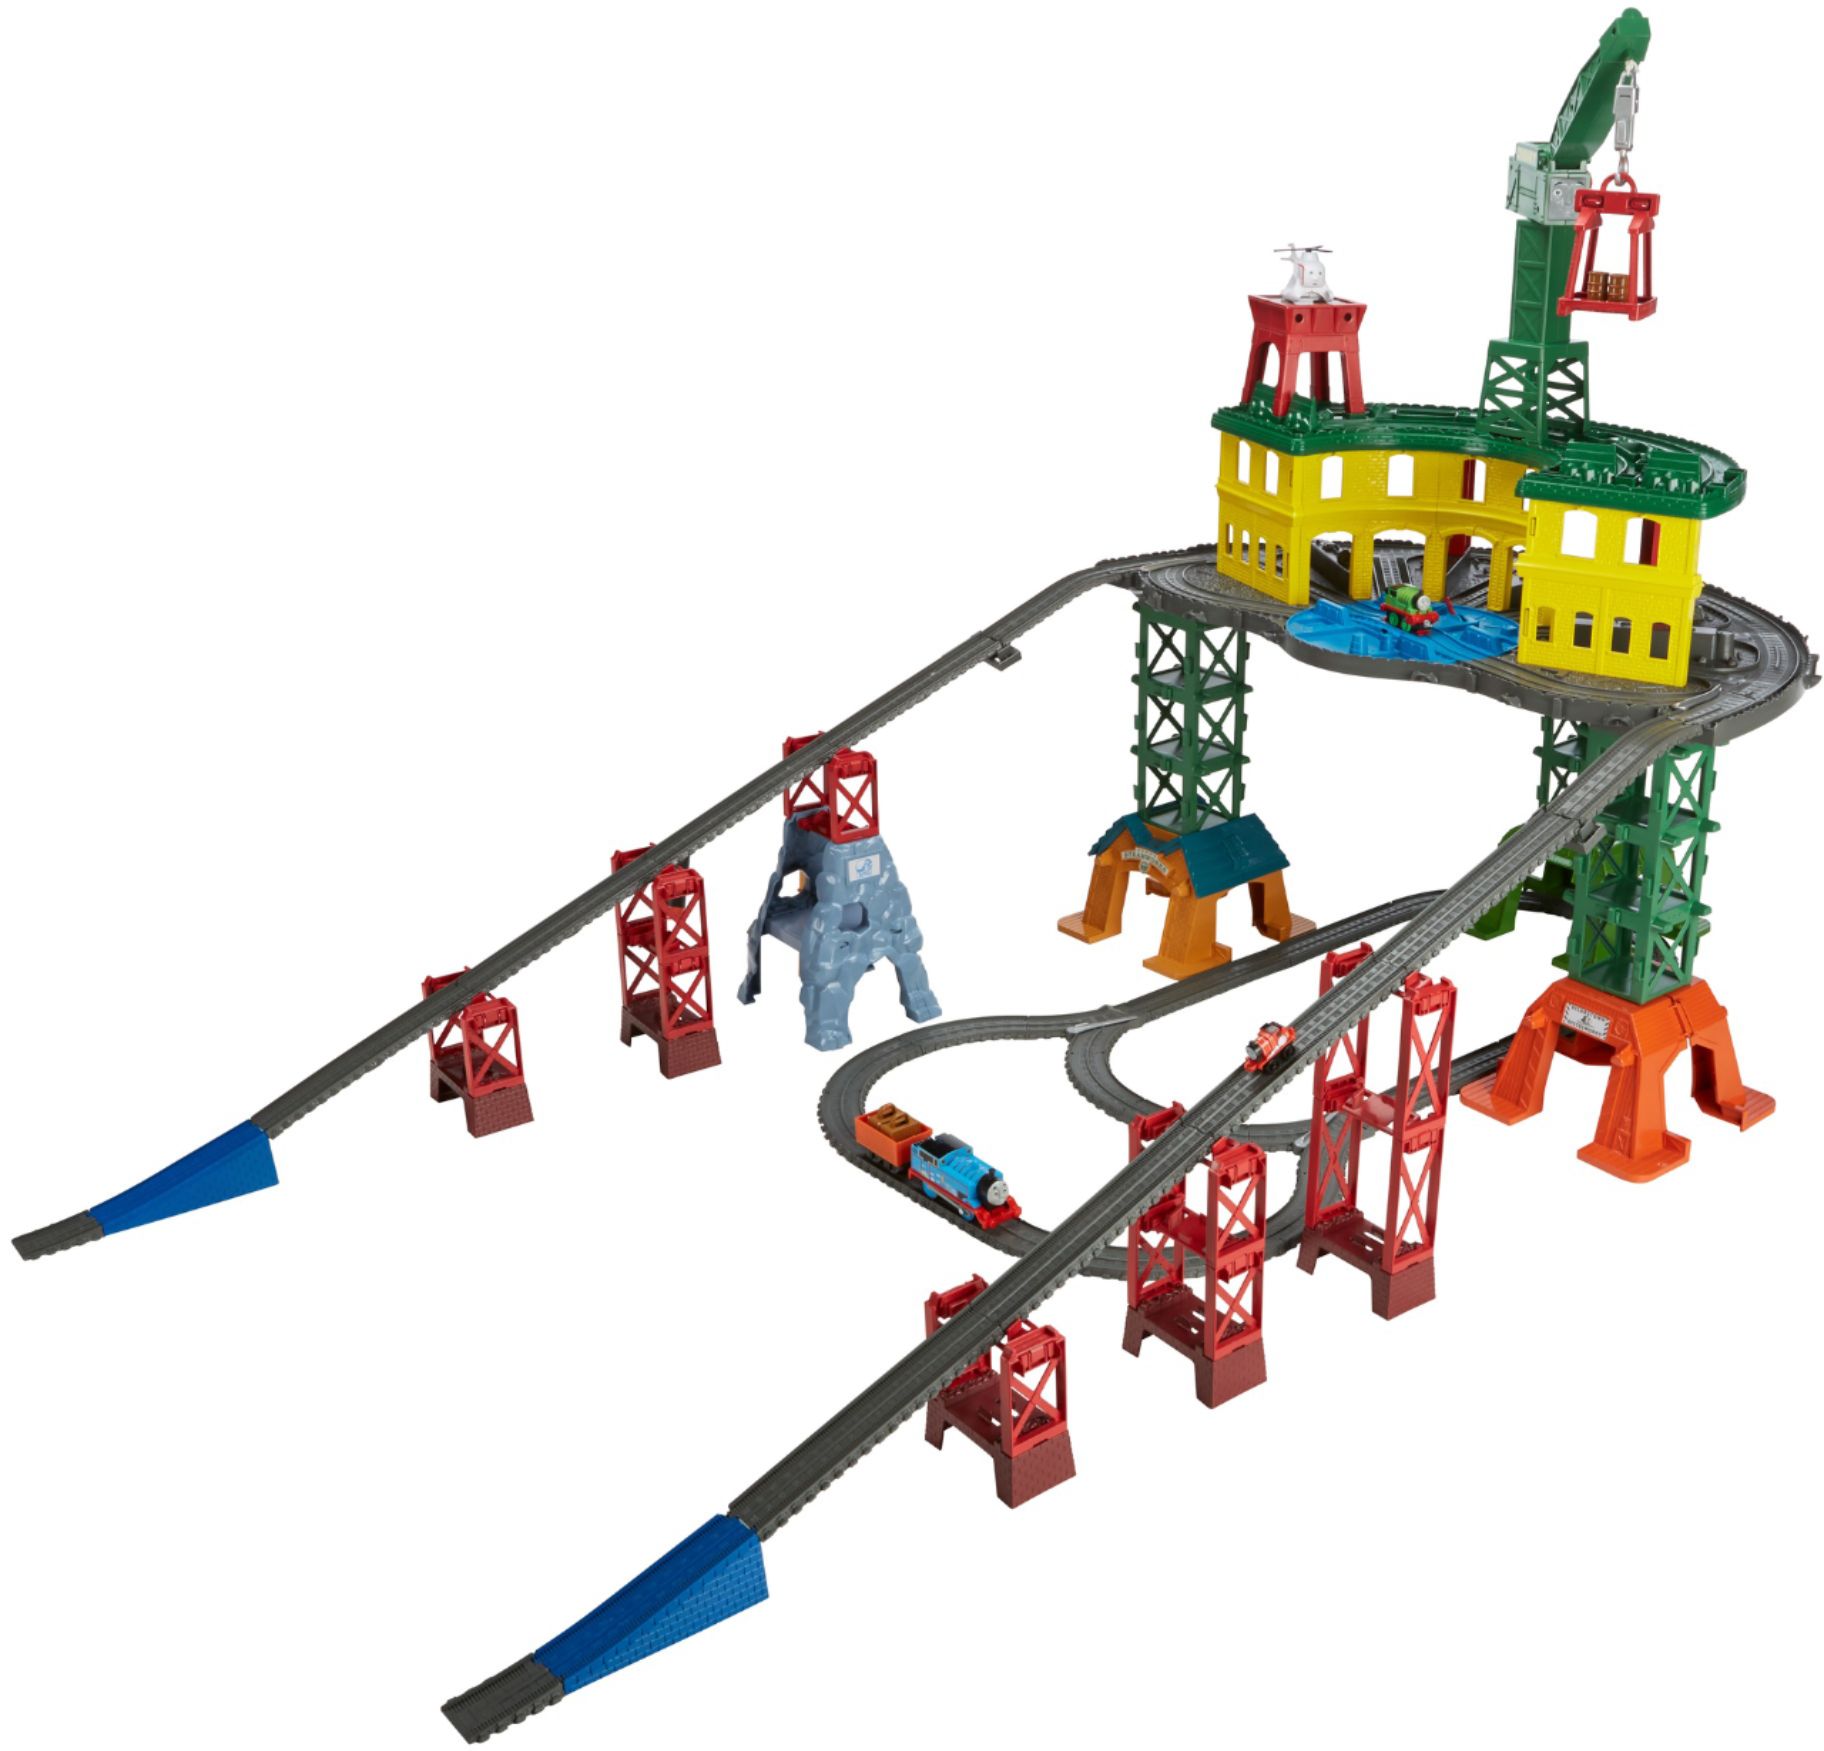 thomas and friends track set